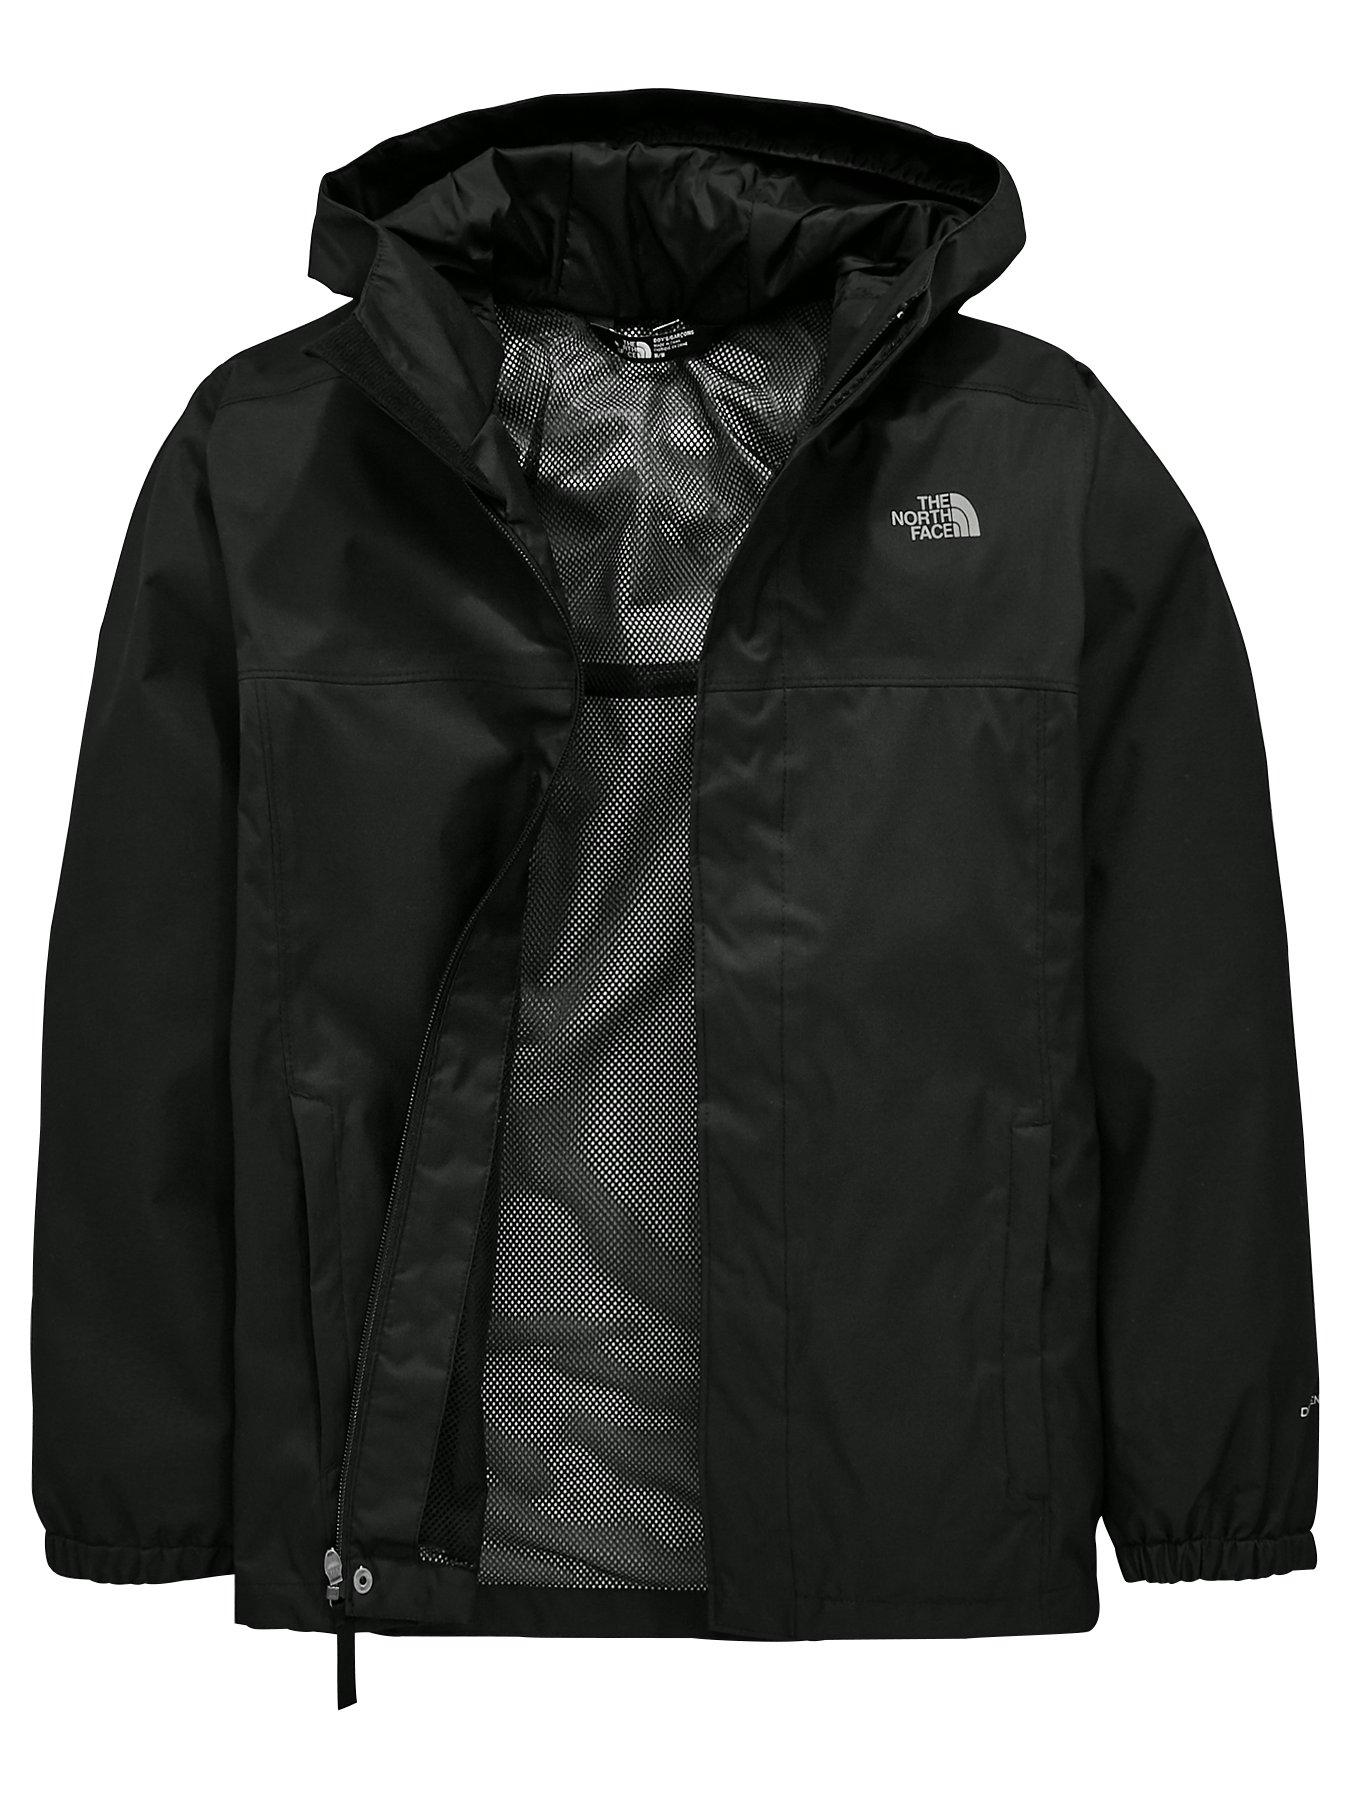 boys north face jacket with hood